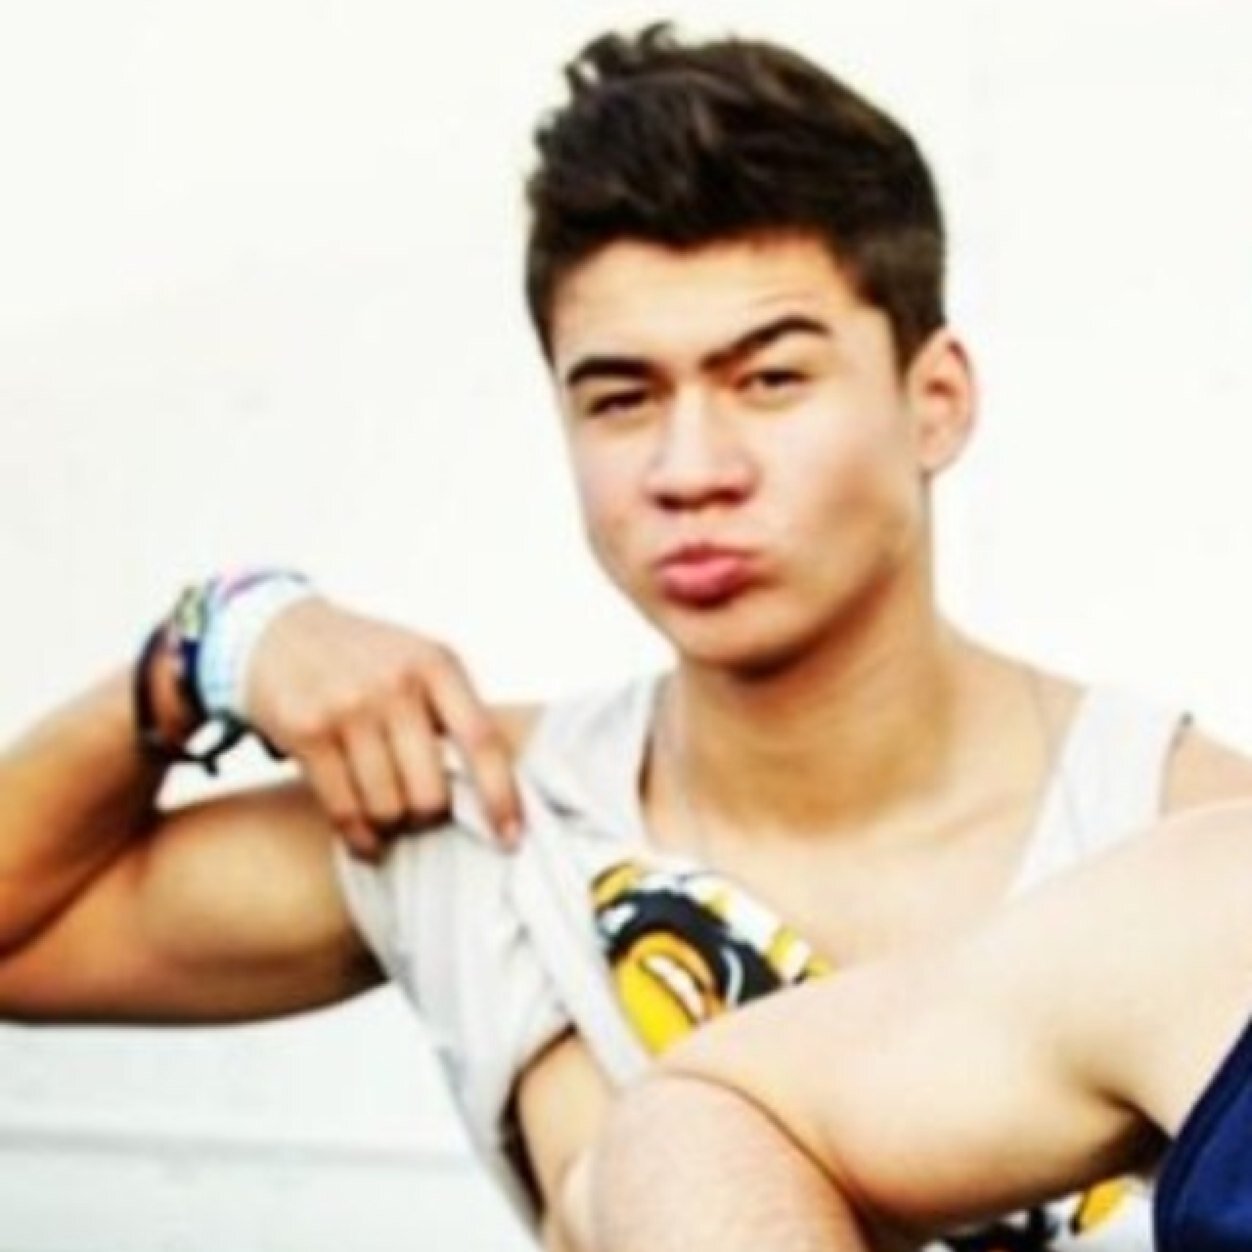 free follow from @ohcalumityx letting you know CALUM HOOD WOULD DATE YOU SO HARD